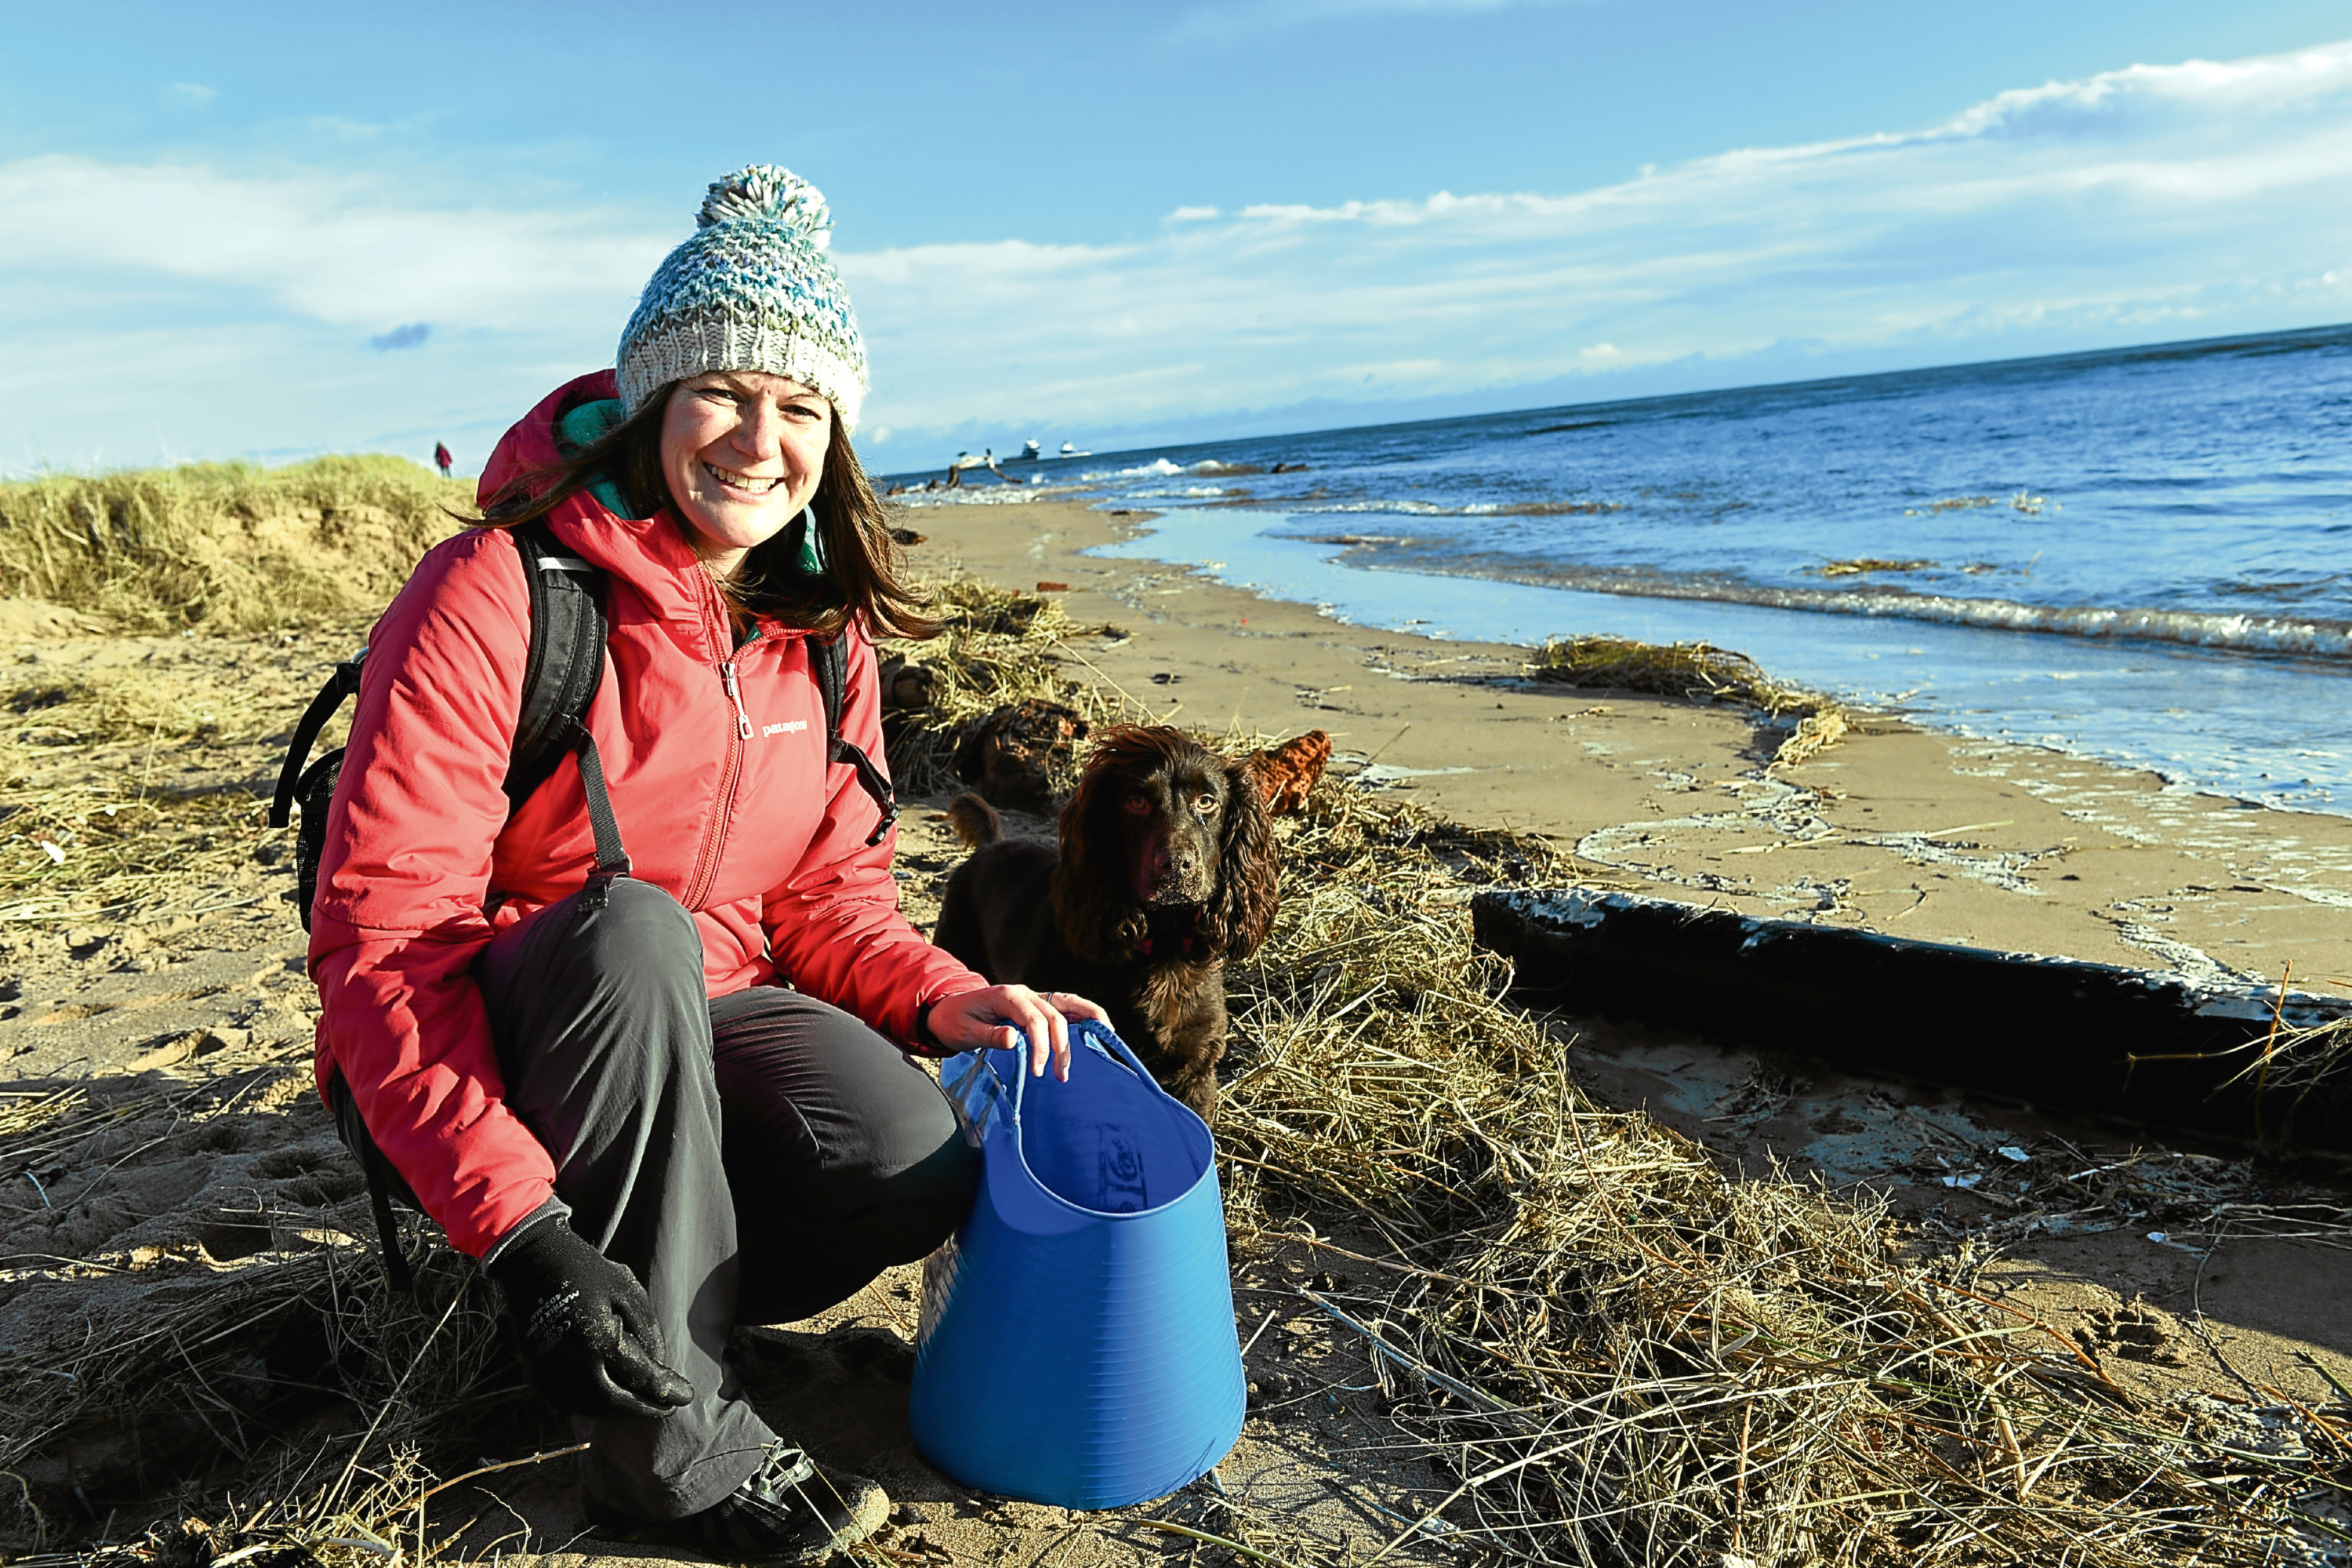 Marine biologist Lauren Smith, who also represents Aberdeen for Surfers Against Sewage, organises beach clean ups and is often helped by her spaniel Tattie.     
Picture by Kami Thomson